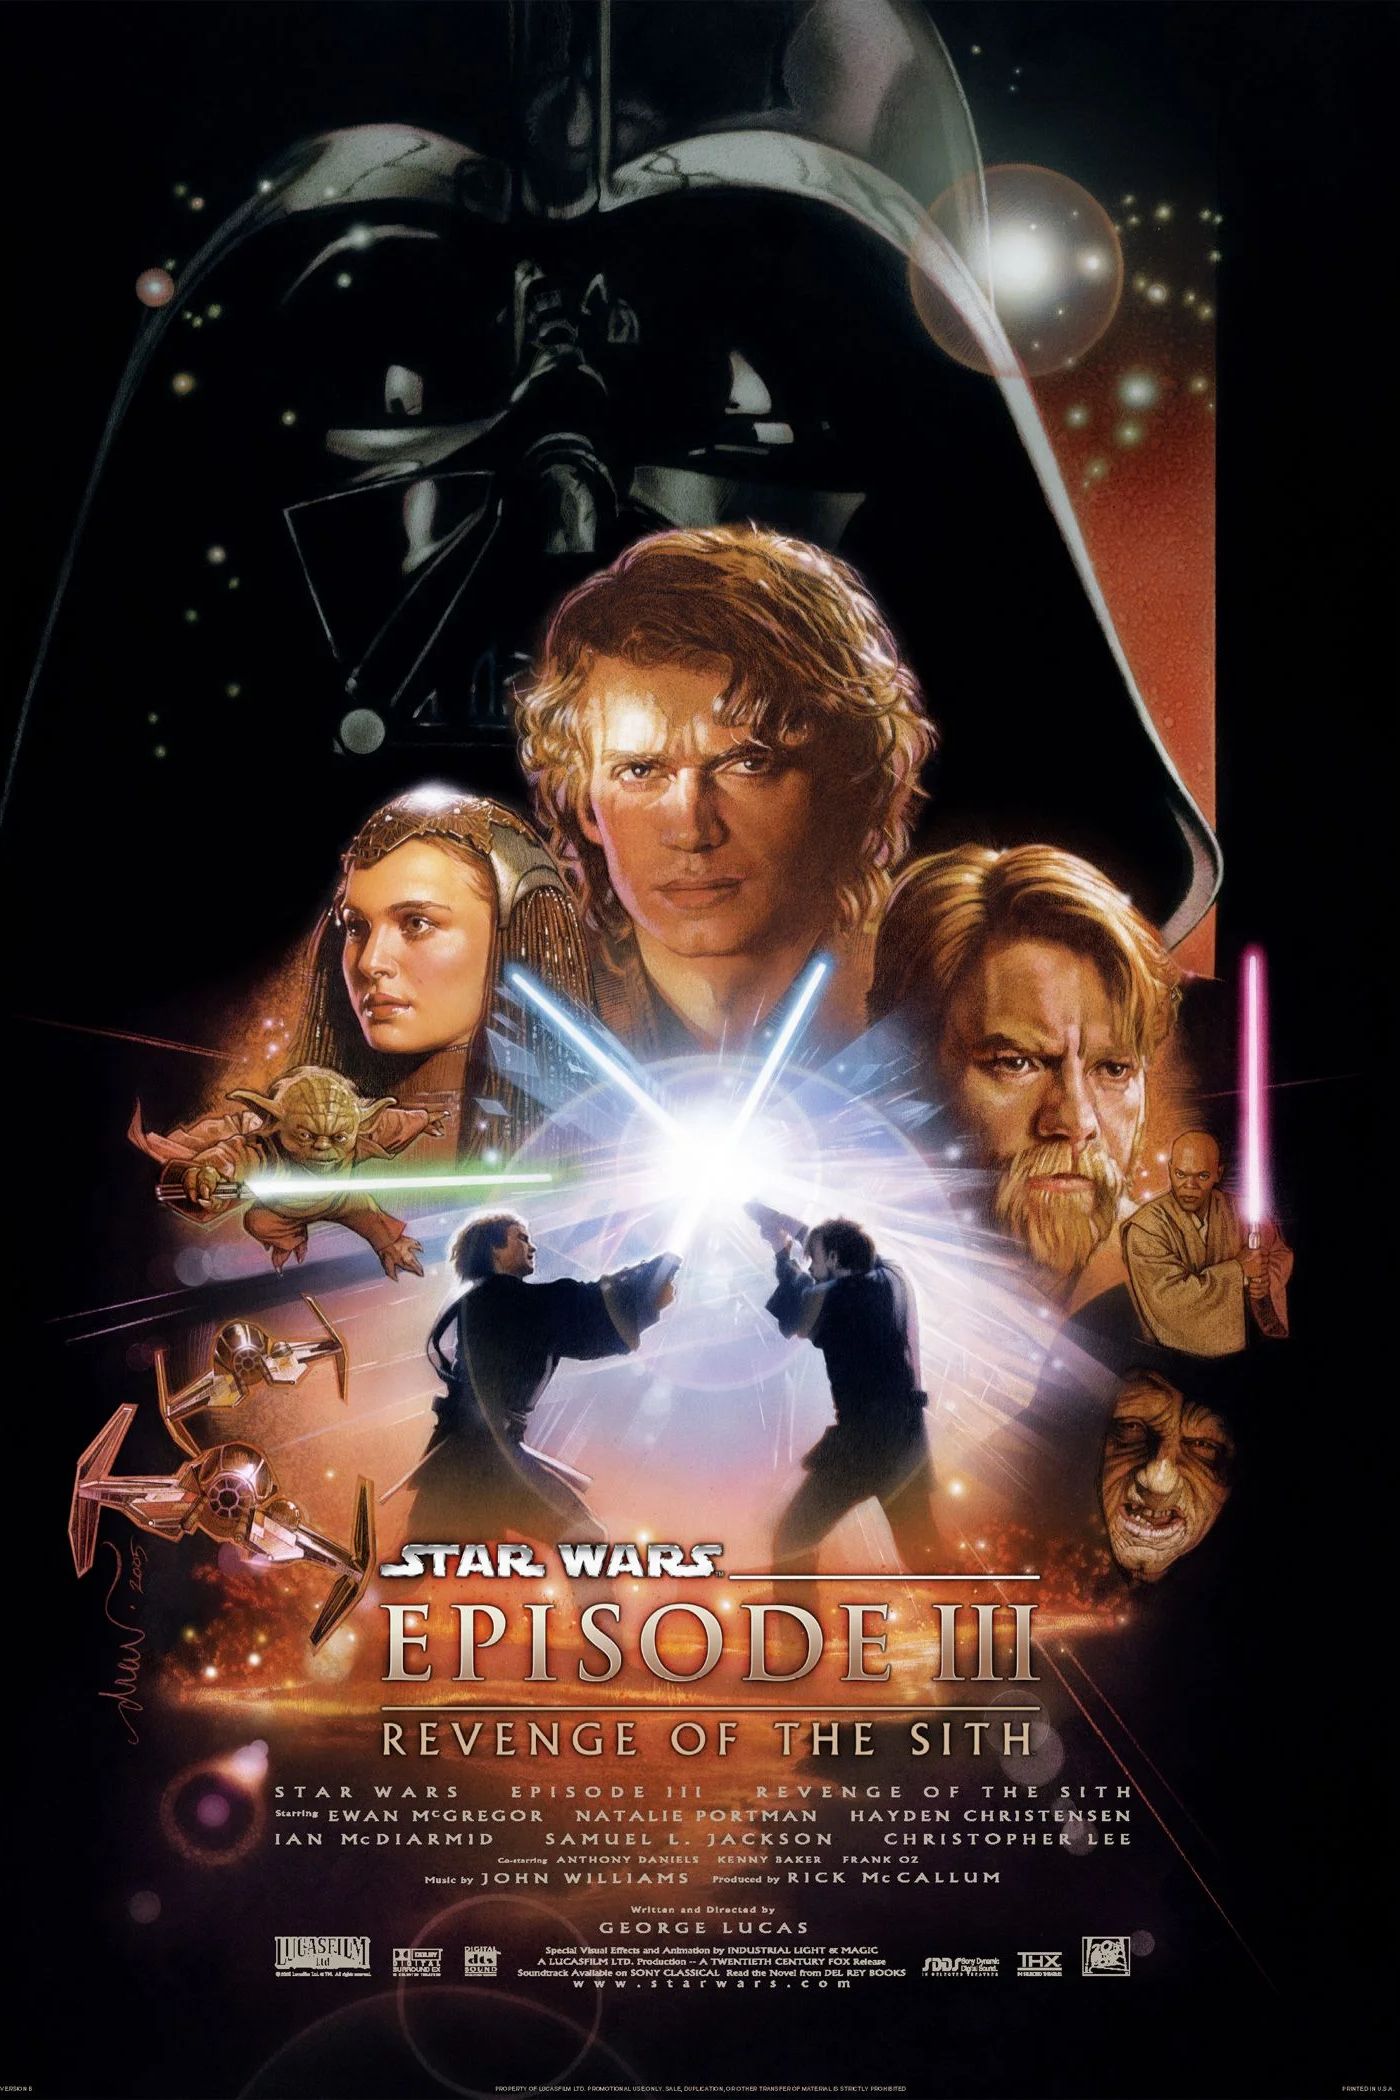 Star Wars Episode III Revenge of the Sith Poster